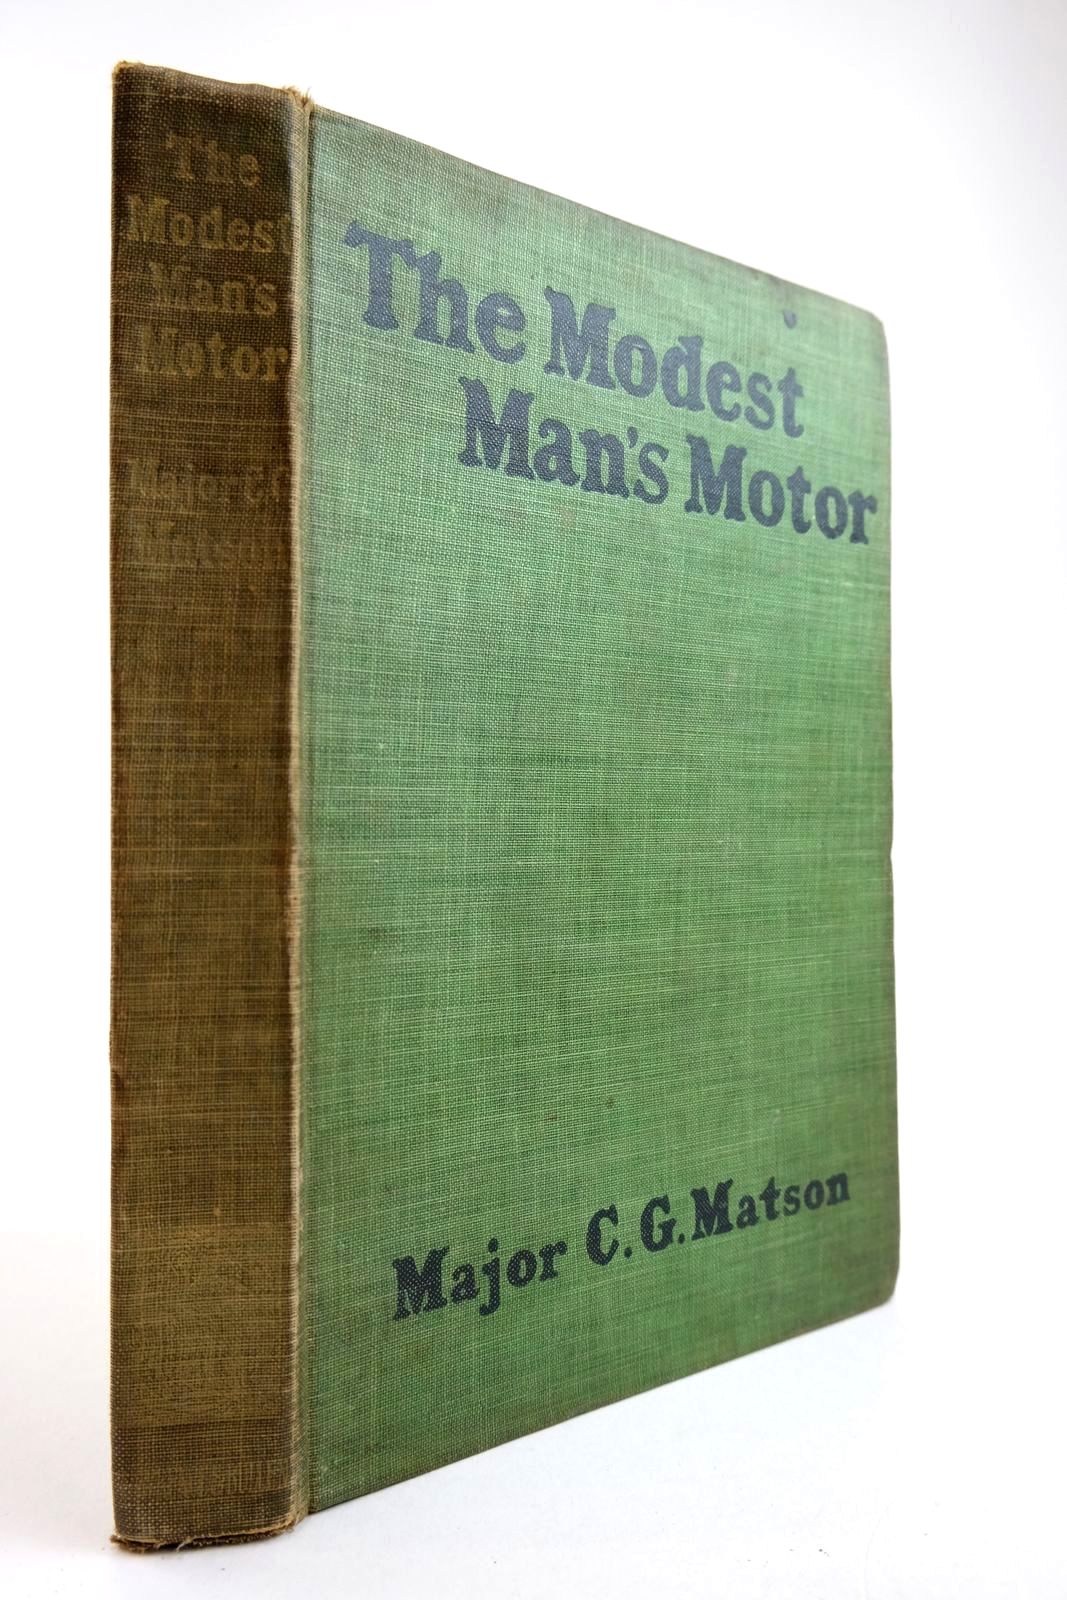 Photo of THE MODEST MAN'S MOTOR- Stock Number: 2133874